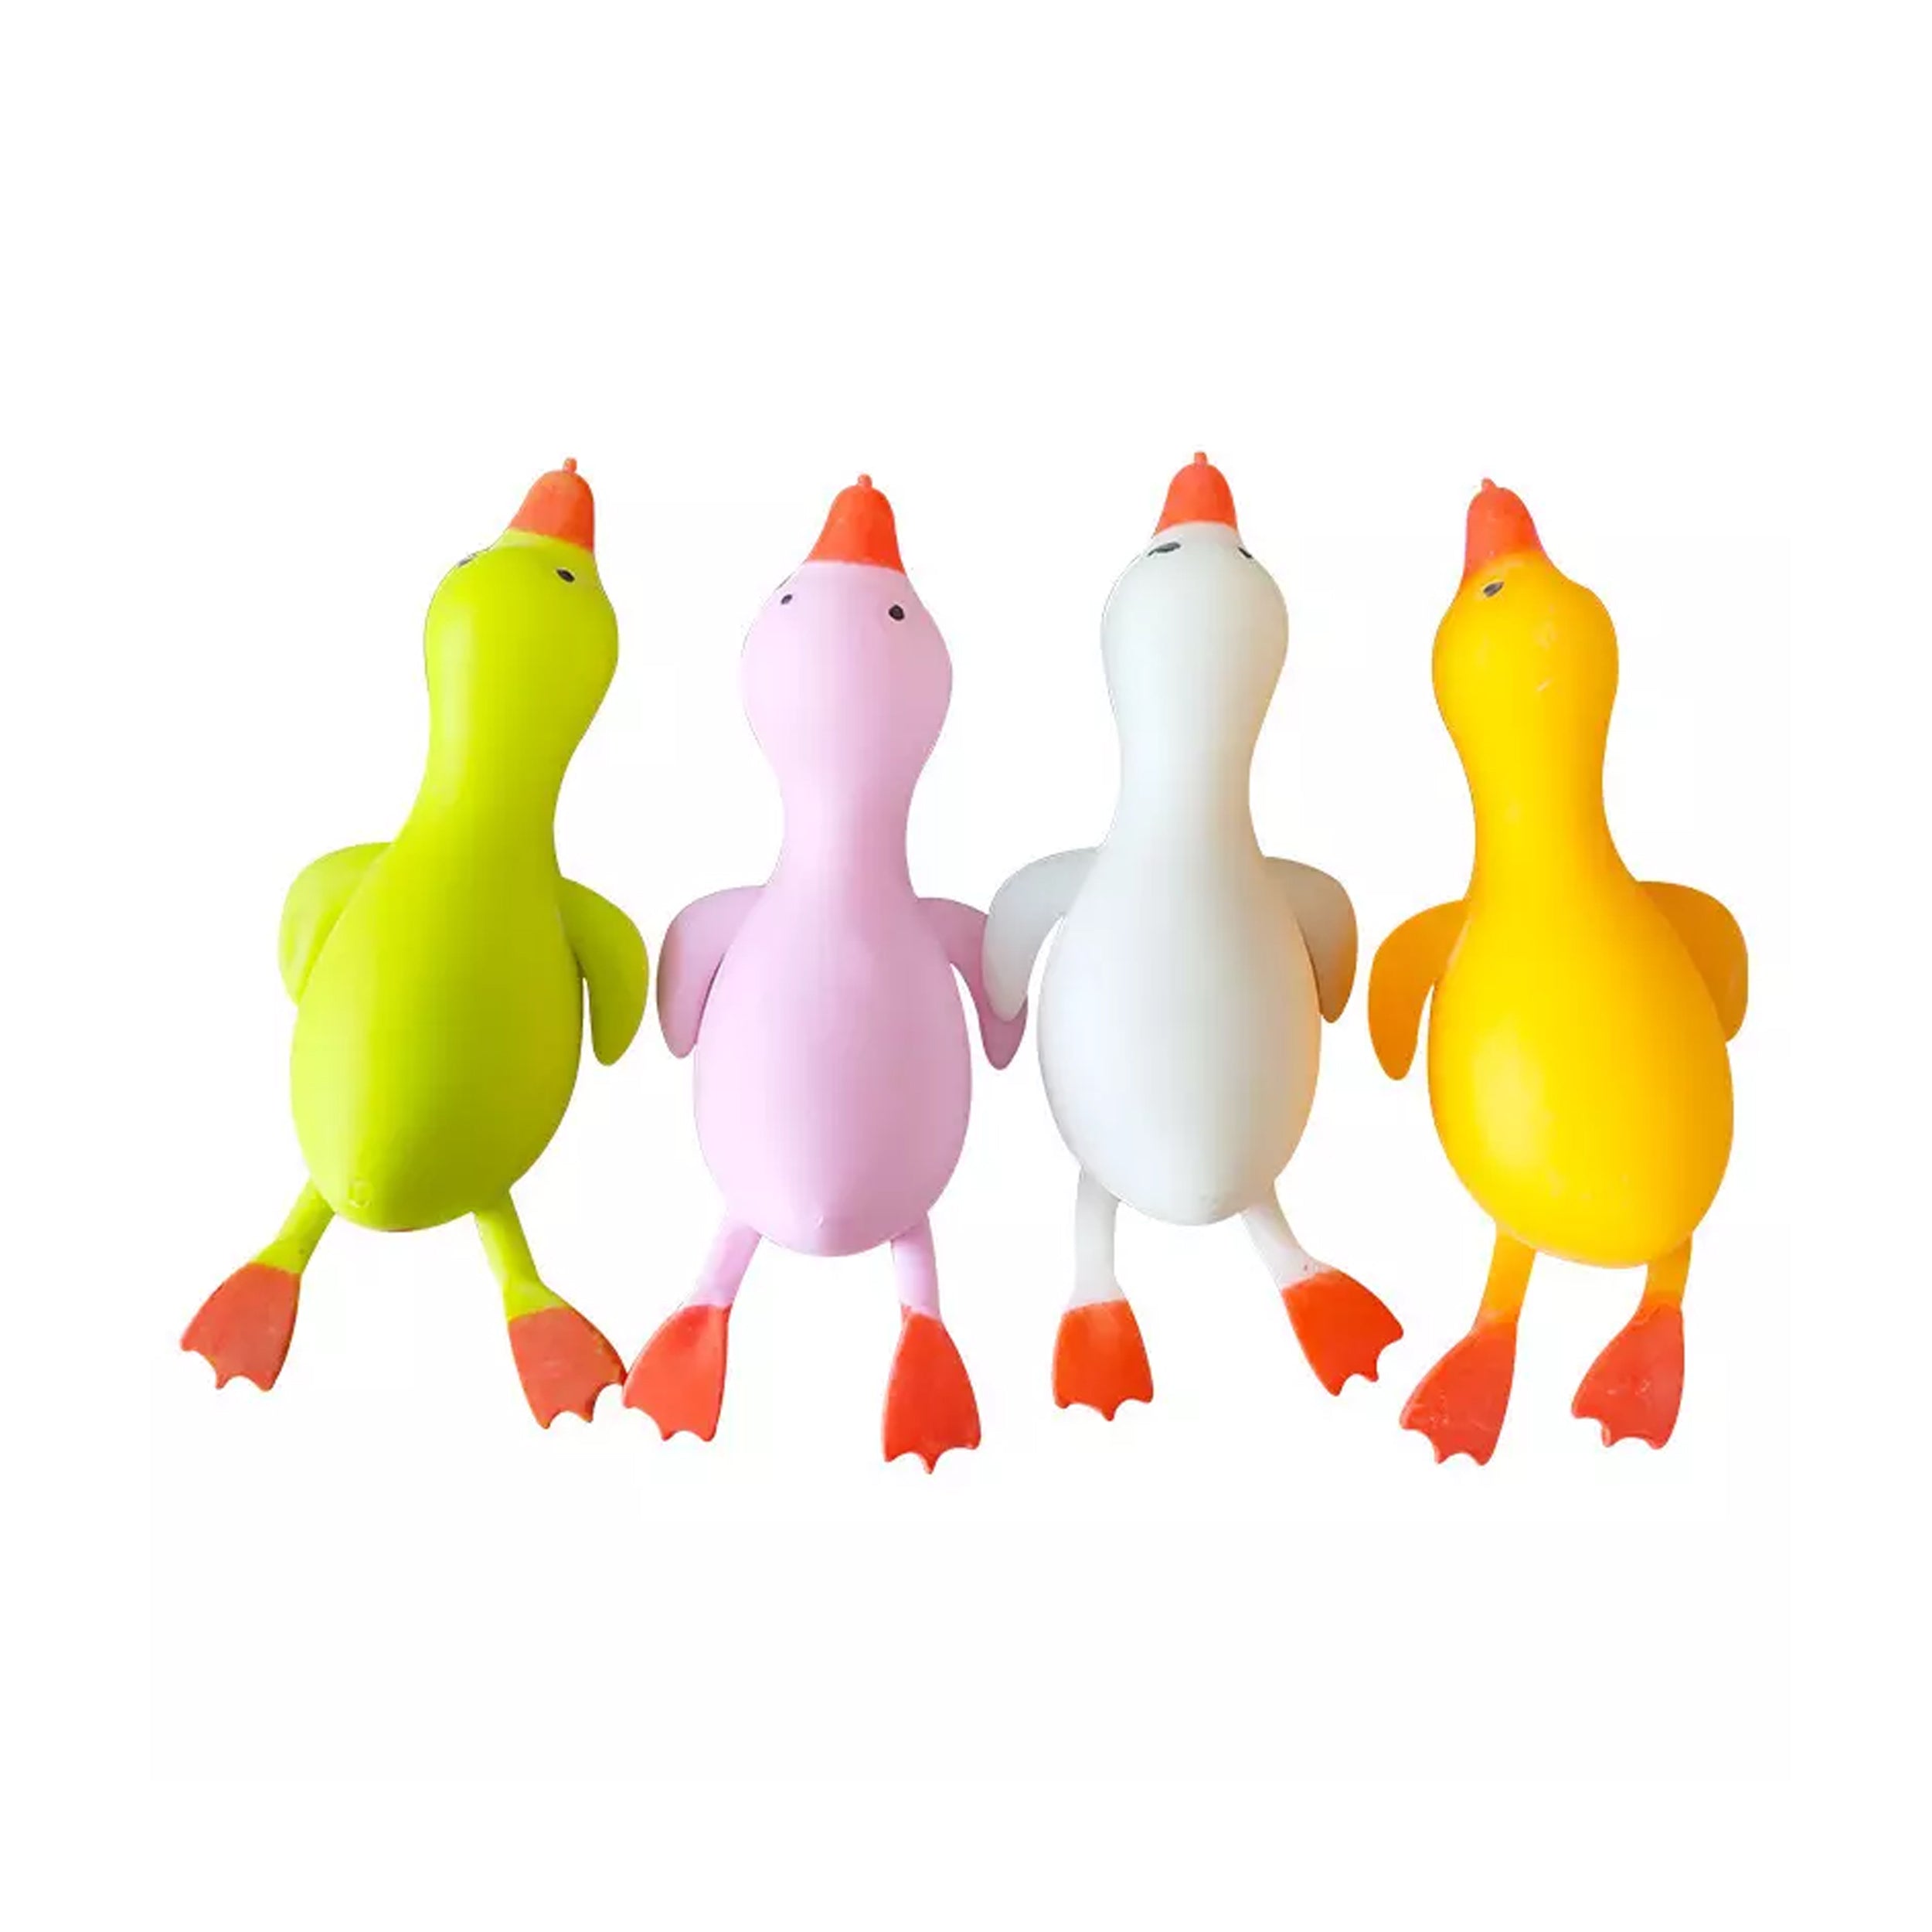 Sand Filled Squishy Duck Toy - Unique and Relaxing for Relief | JSBlueRidge Wholesale – JSBlueRidge.com